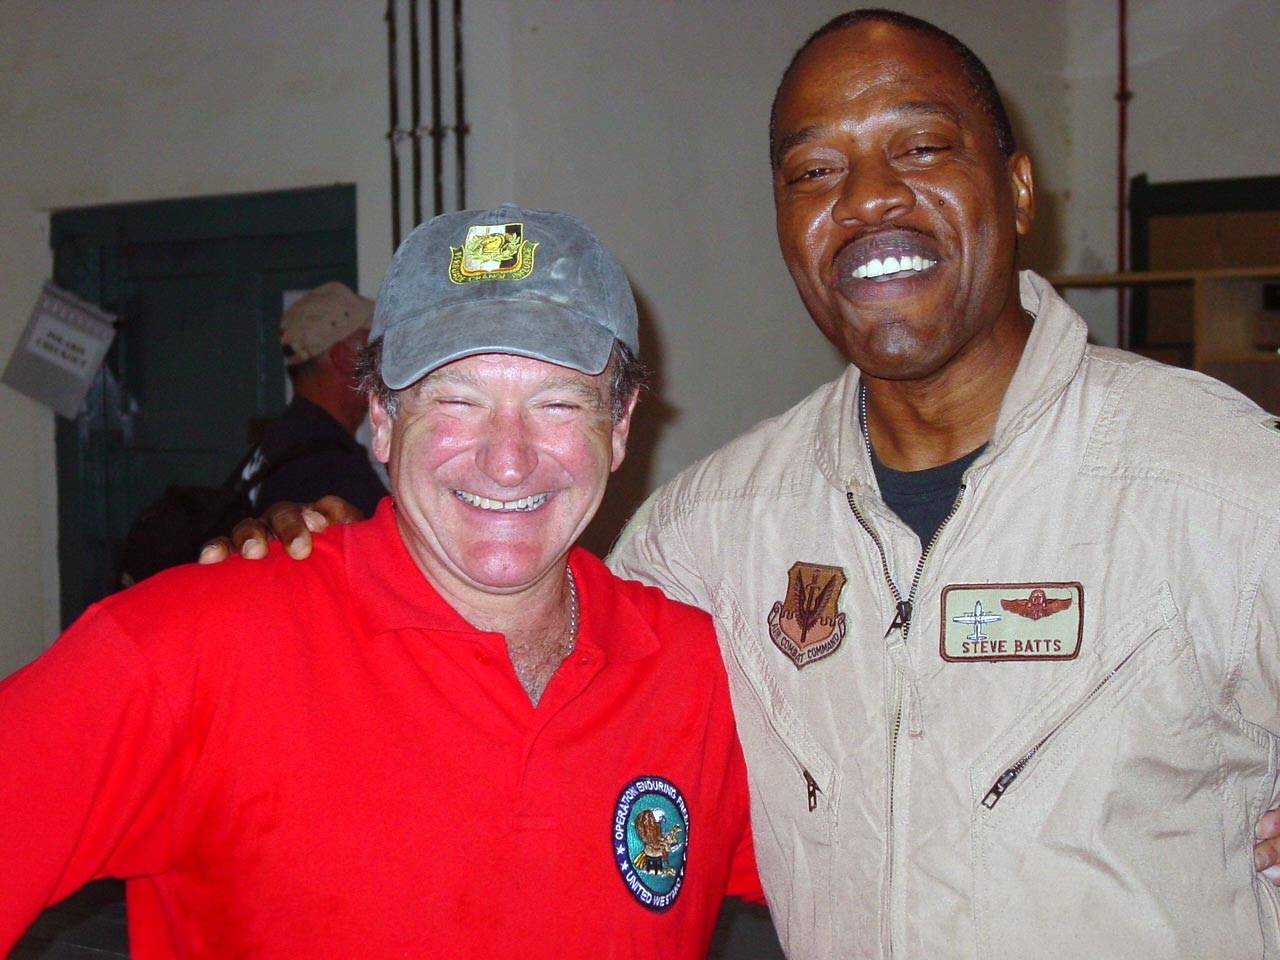 Stephen Batts with Robin Williams